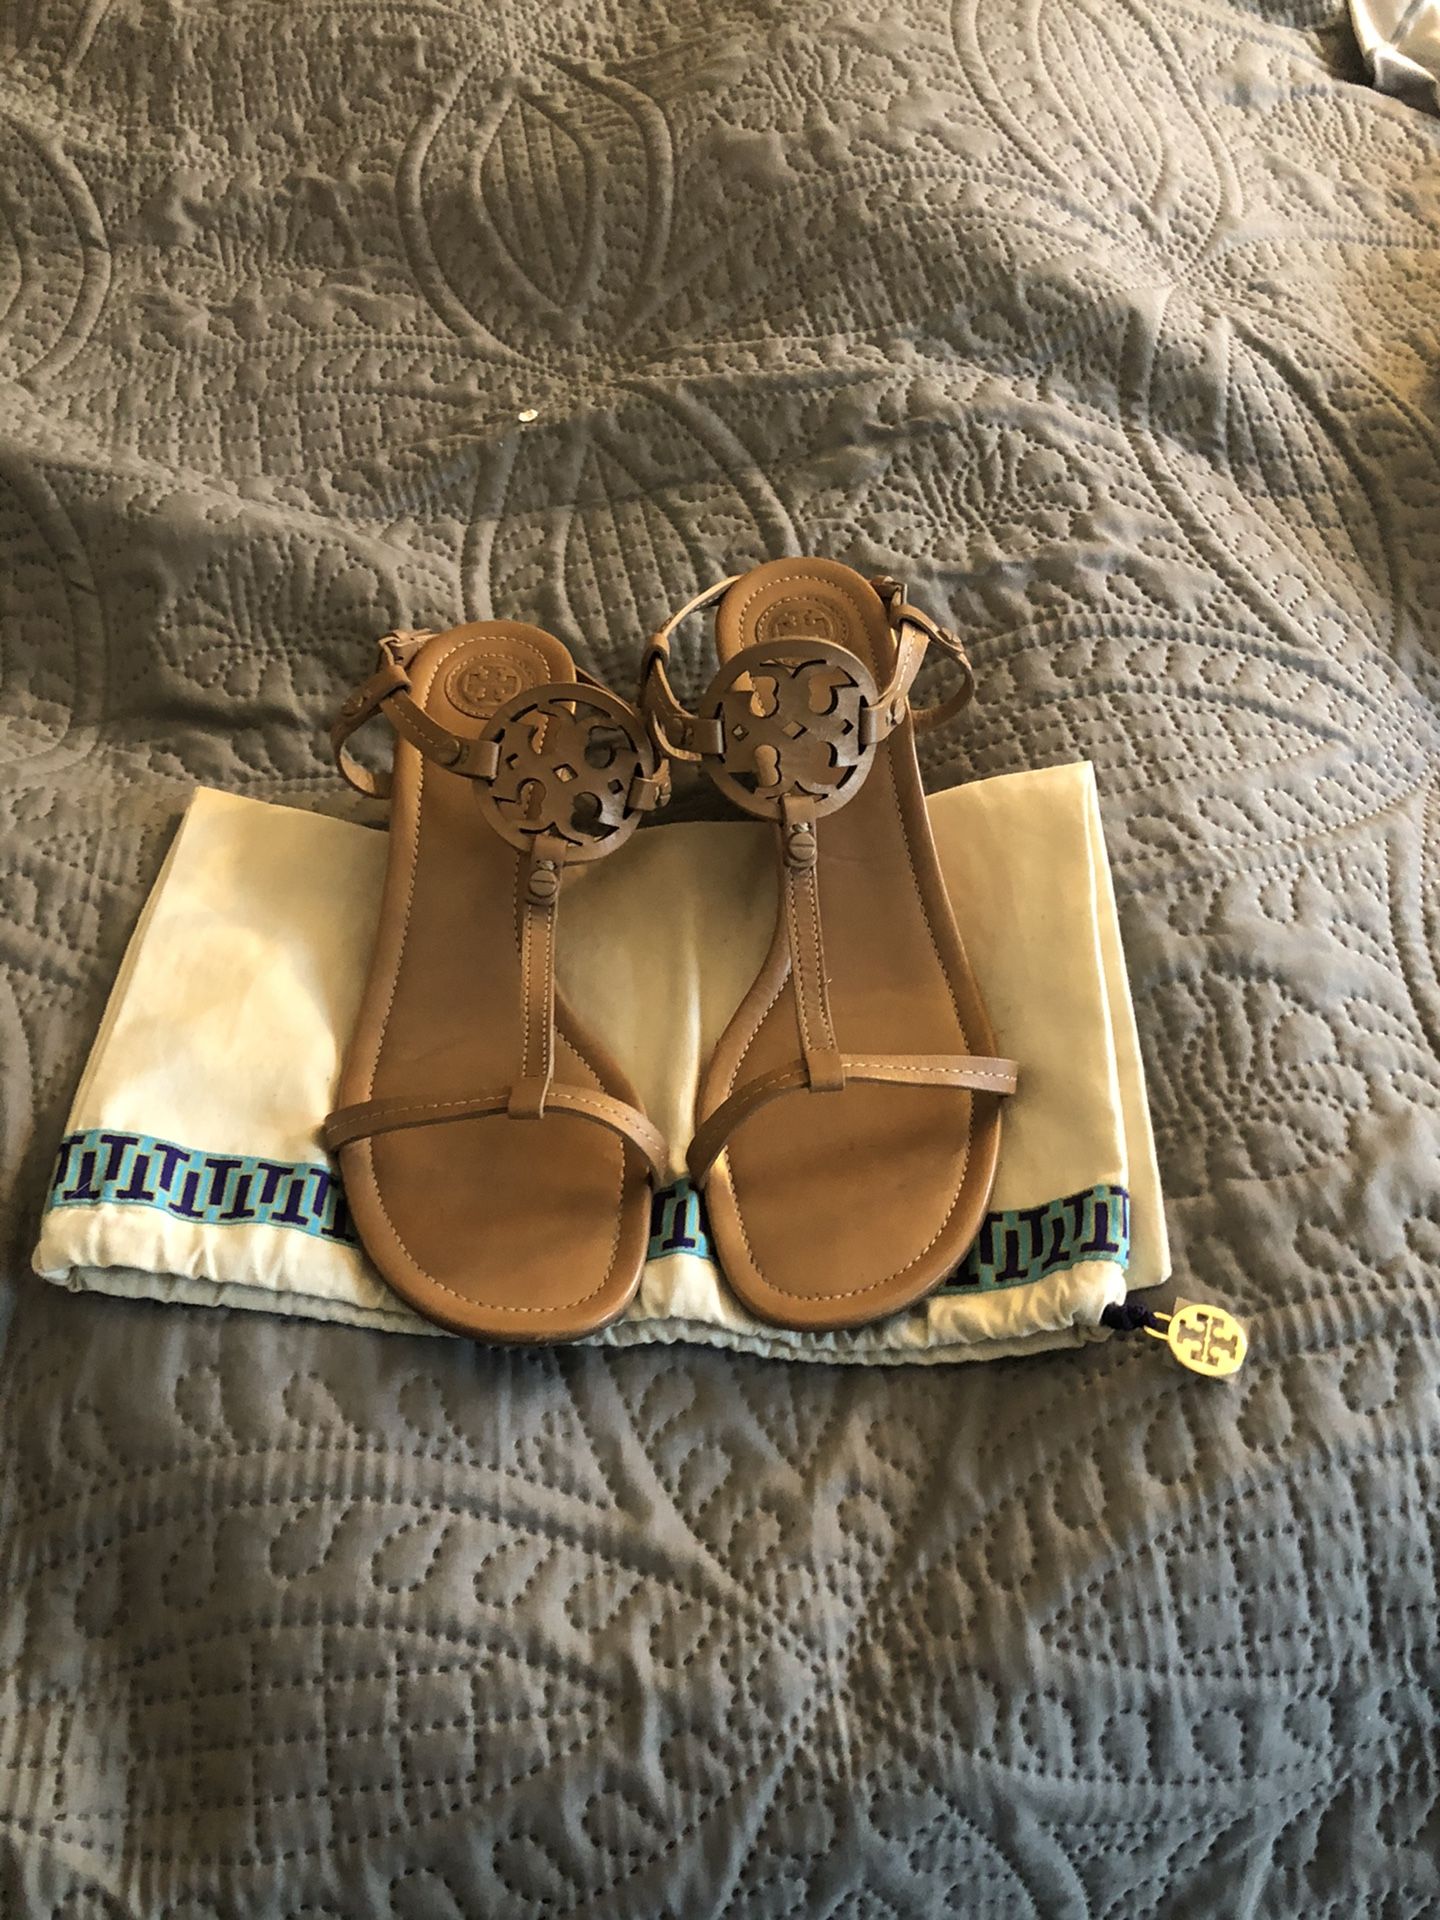 Tory Burch Sandals size 10